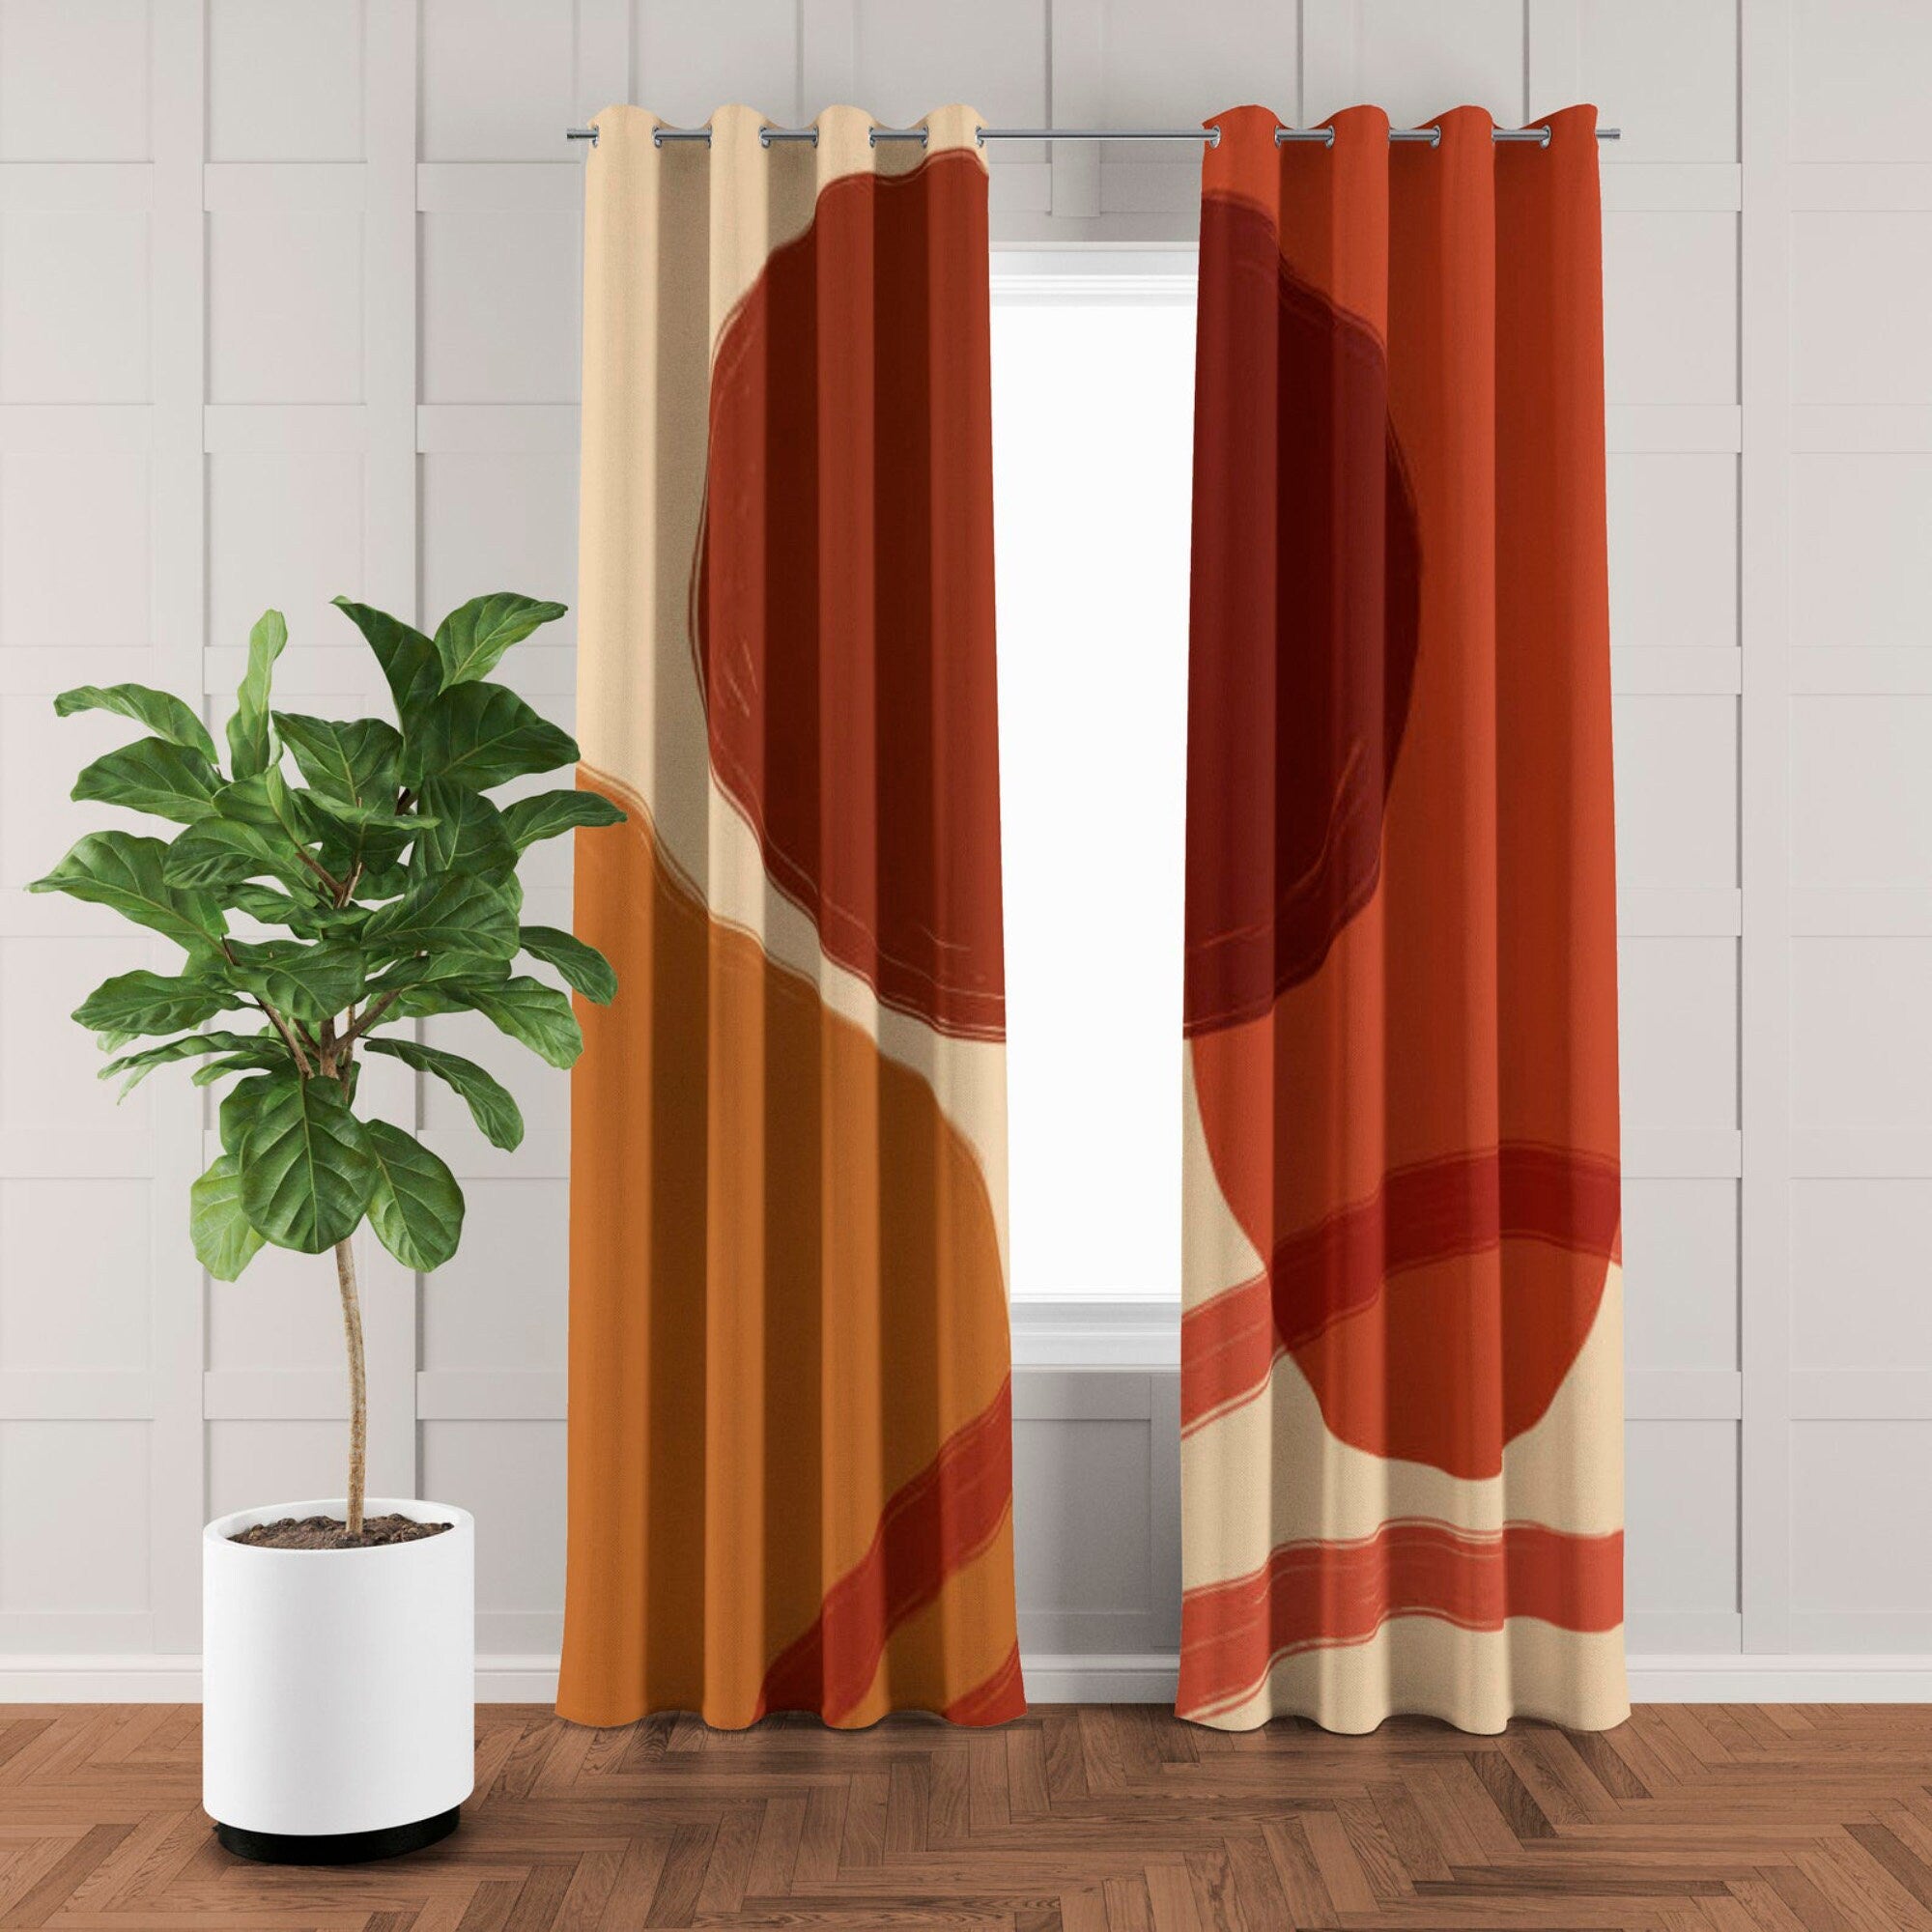 Warm Red Tones Terracotta Mid Century Modern Blackout Window Curtains FLORENCE - 2 Panels